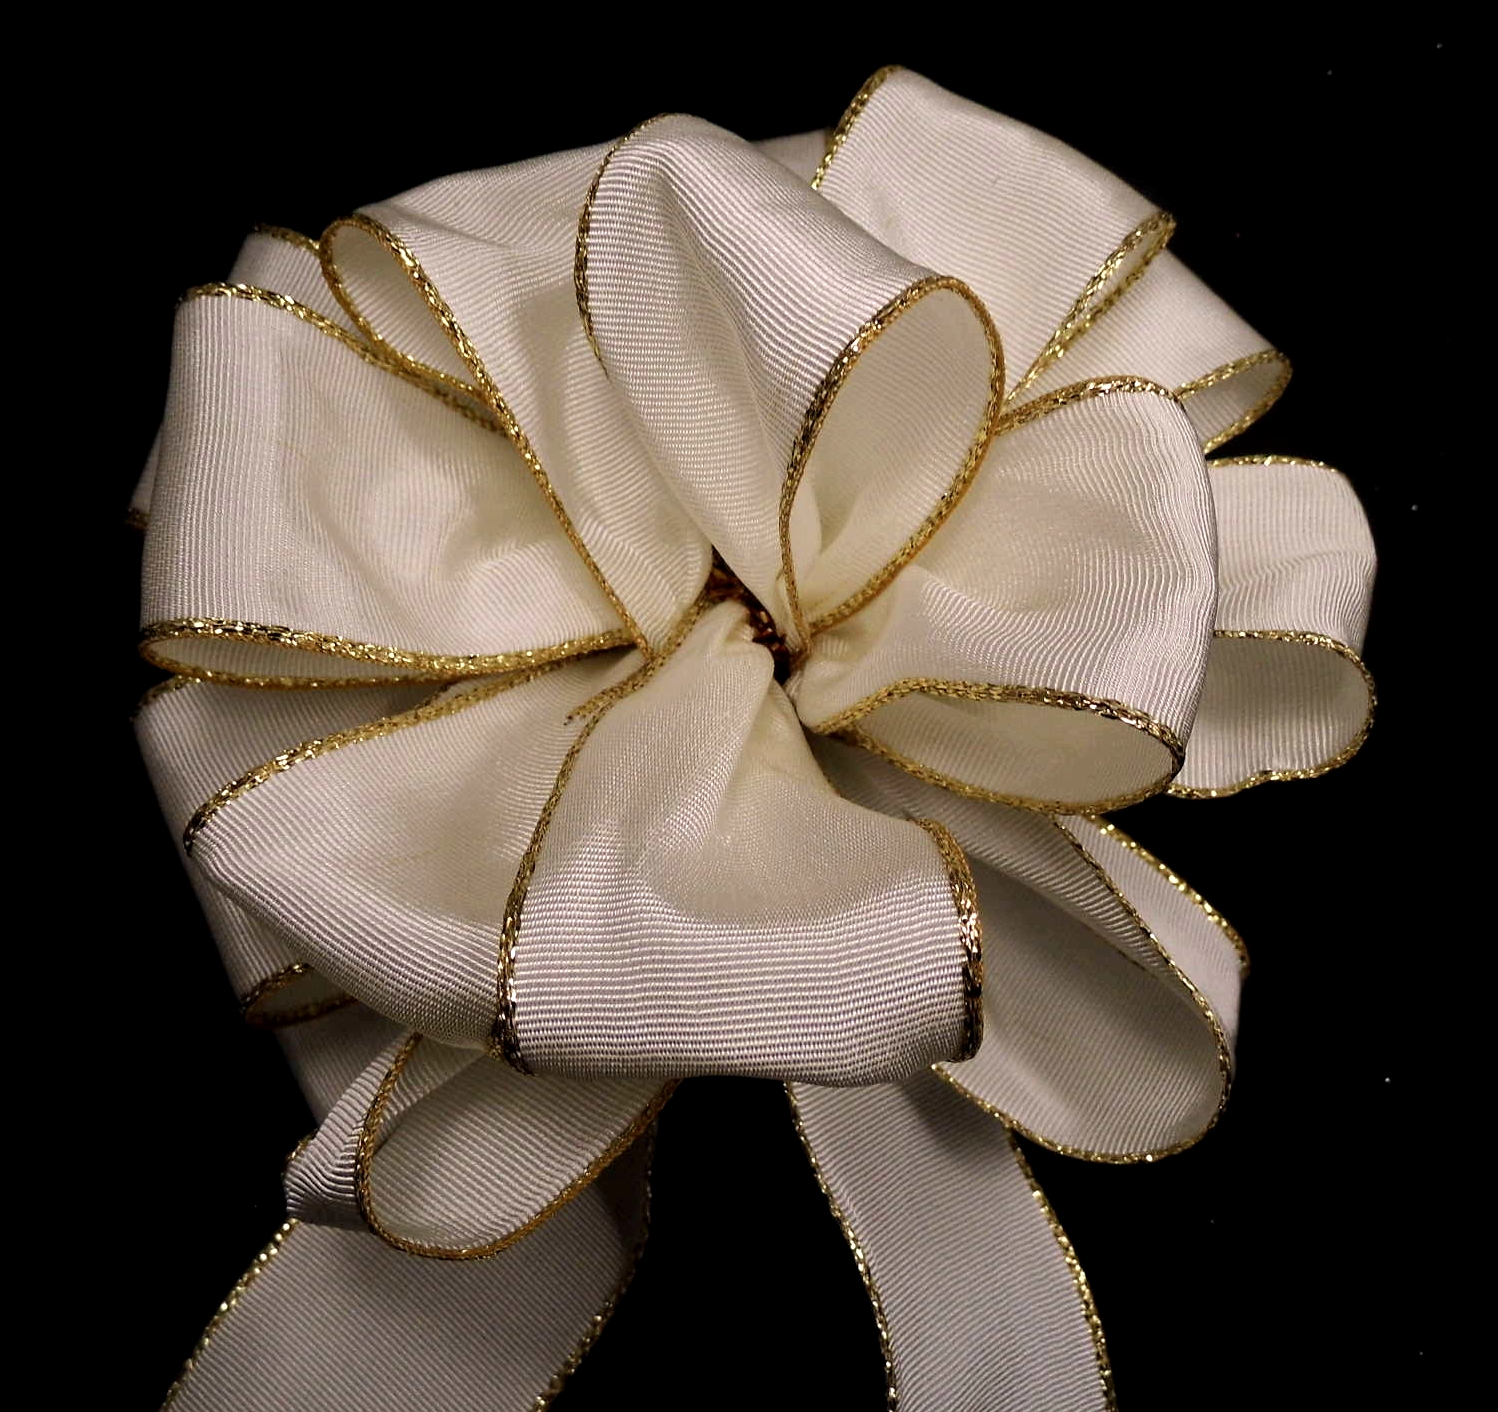 Wired Ornament Ribbon from American Ribbon Manufacturers